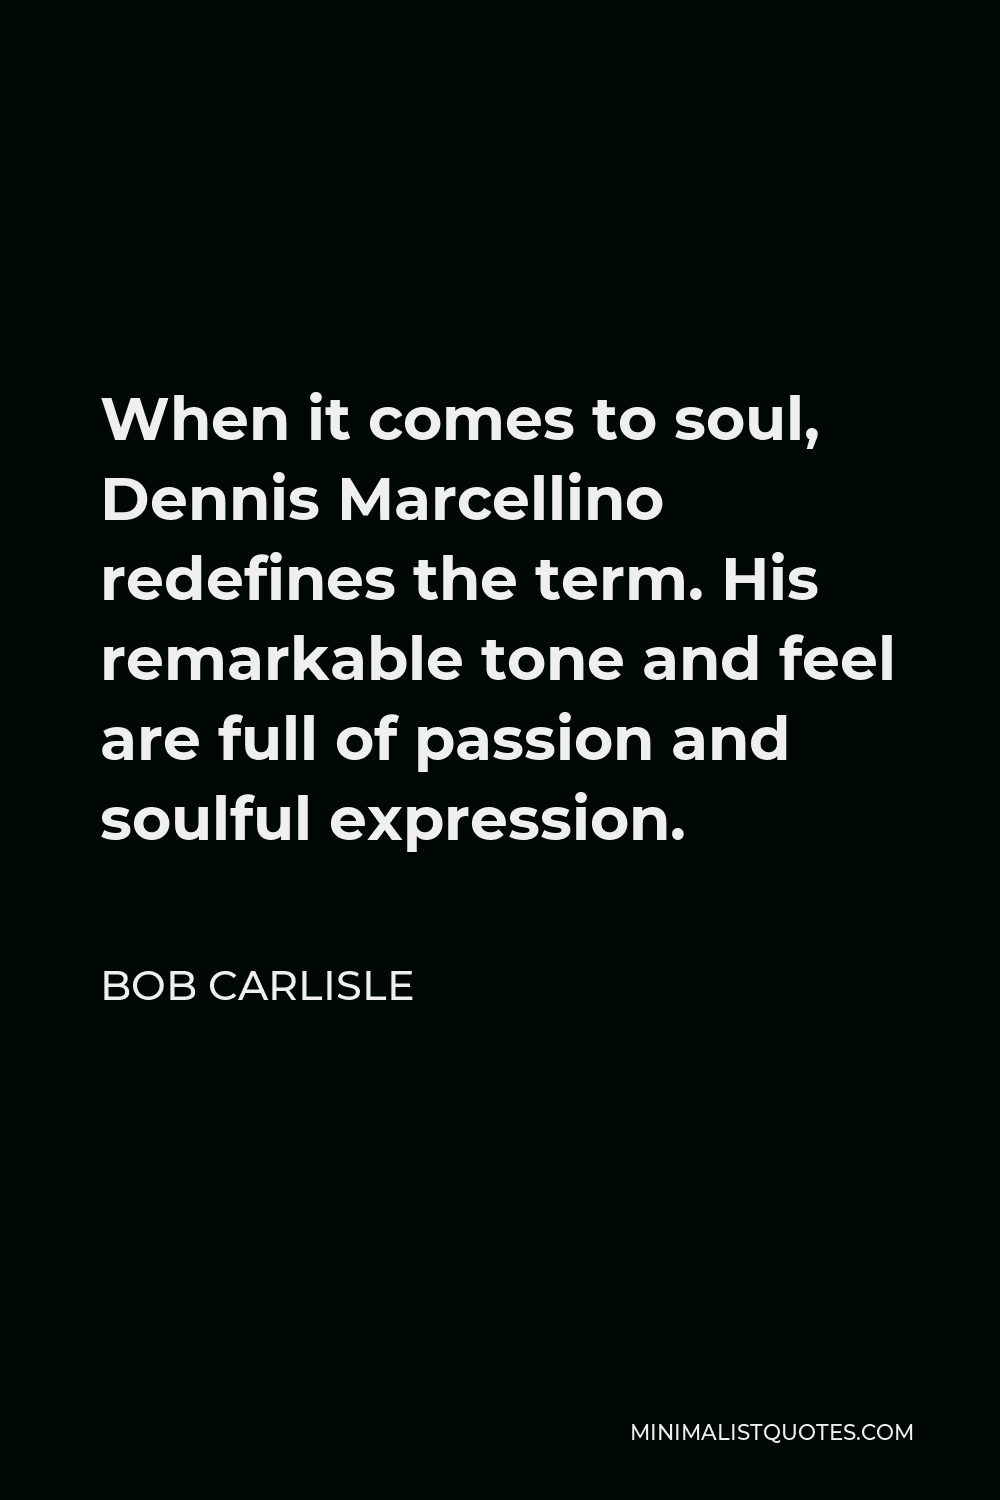 Bob Carlisle Quote - When it comes to soul, Dennis Marcellino redefines the term. His remarkable tone and feel are full of passion and soulful expression.